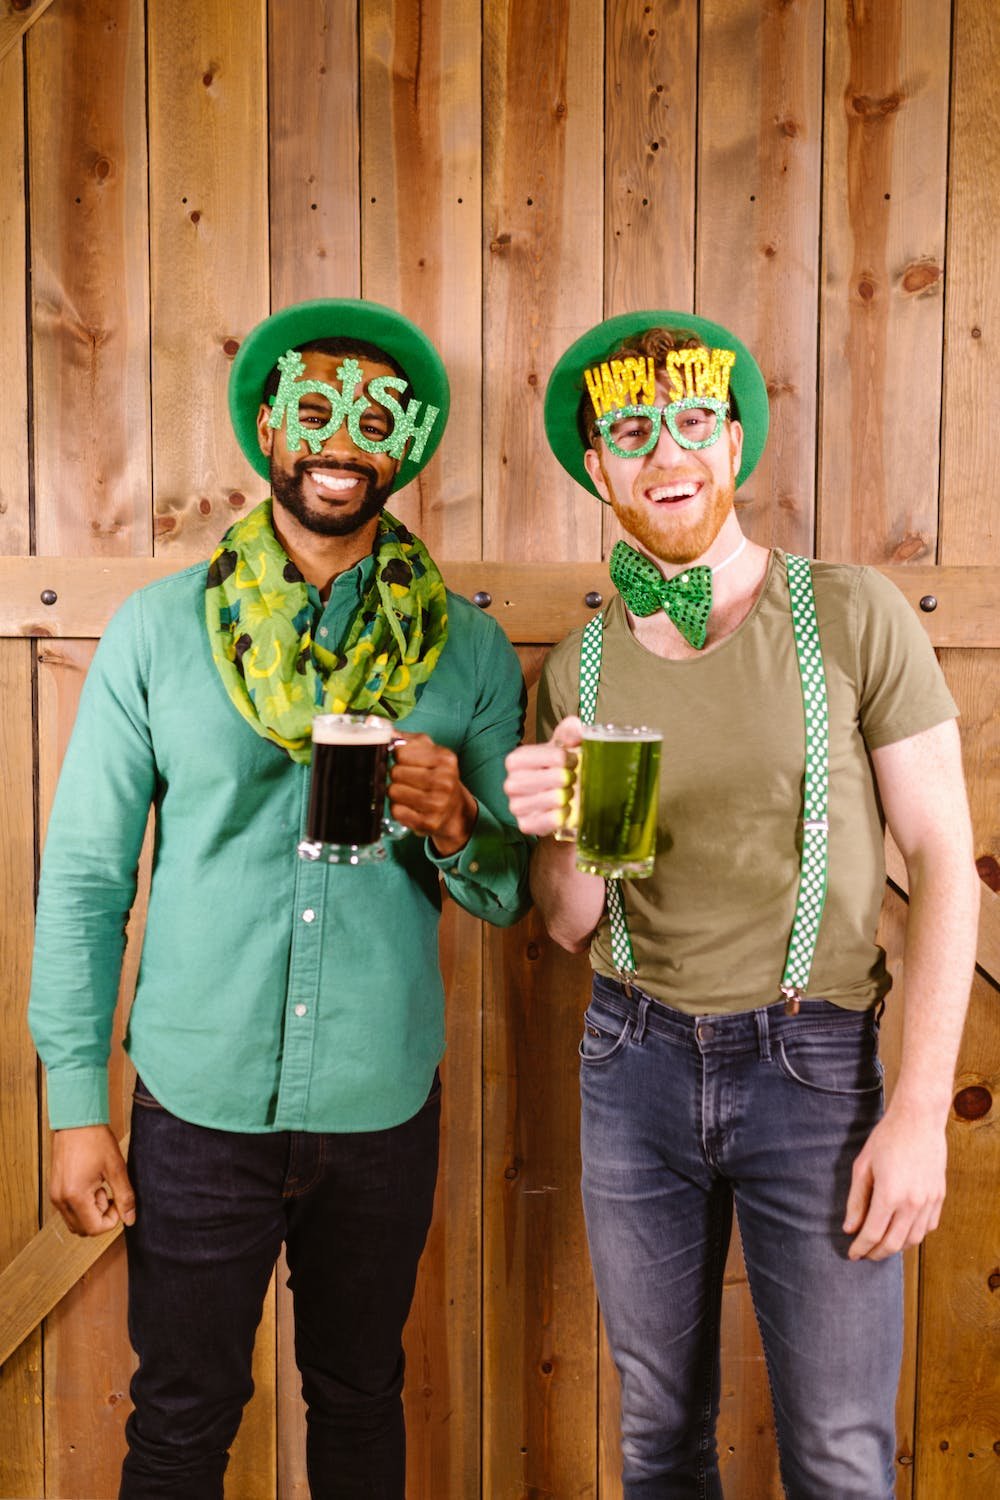 Everyone partakes in the luck of the Irish on St. Patrick’s Day, and parades are synonymous with this festive holiday.